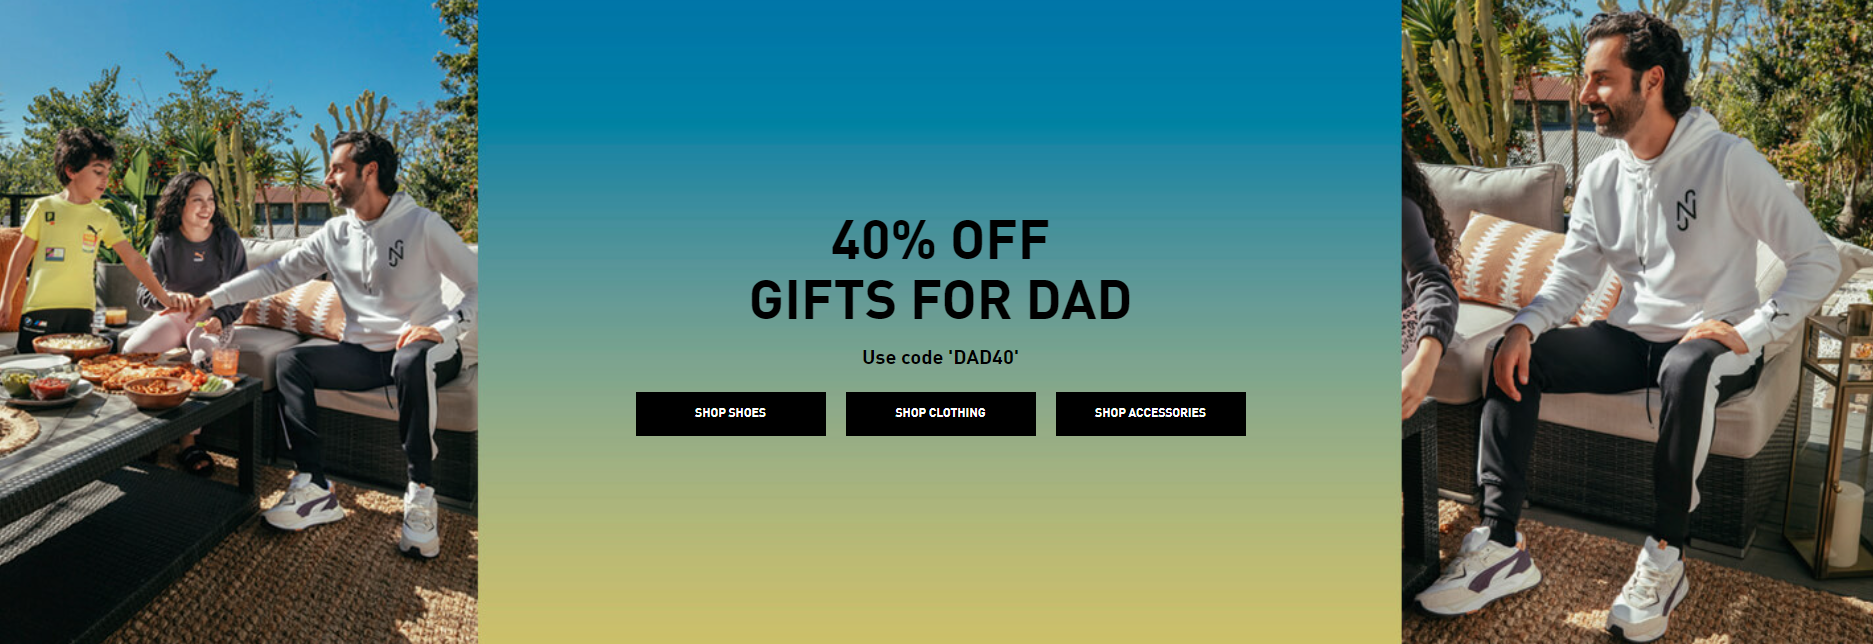 Extra 40% OFF gifts for Dad with discount code at Puma